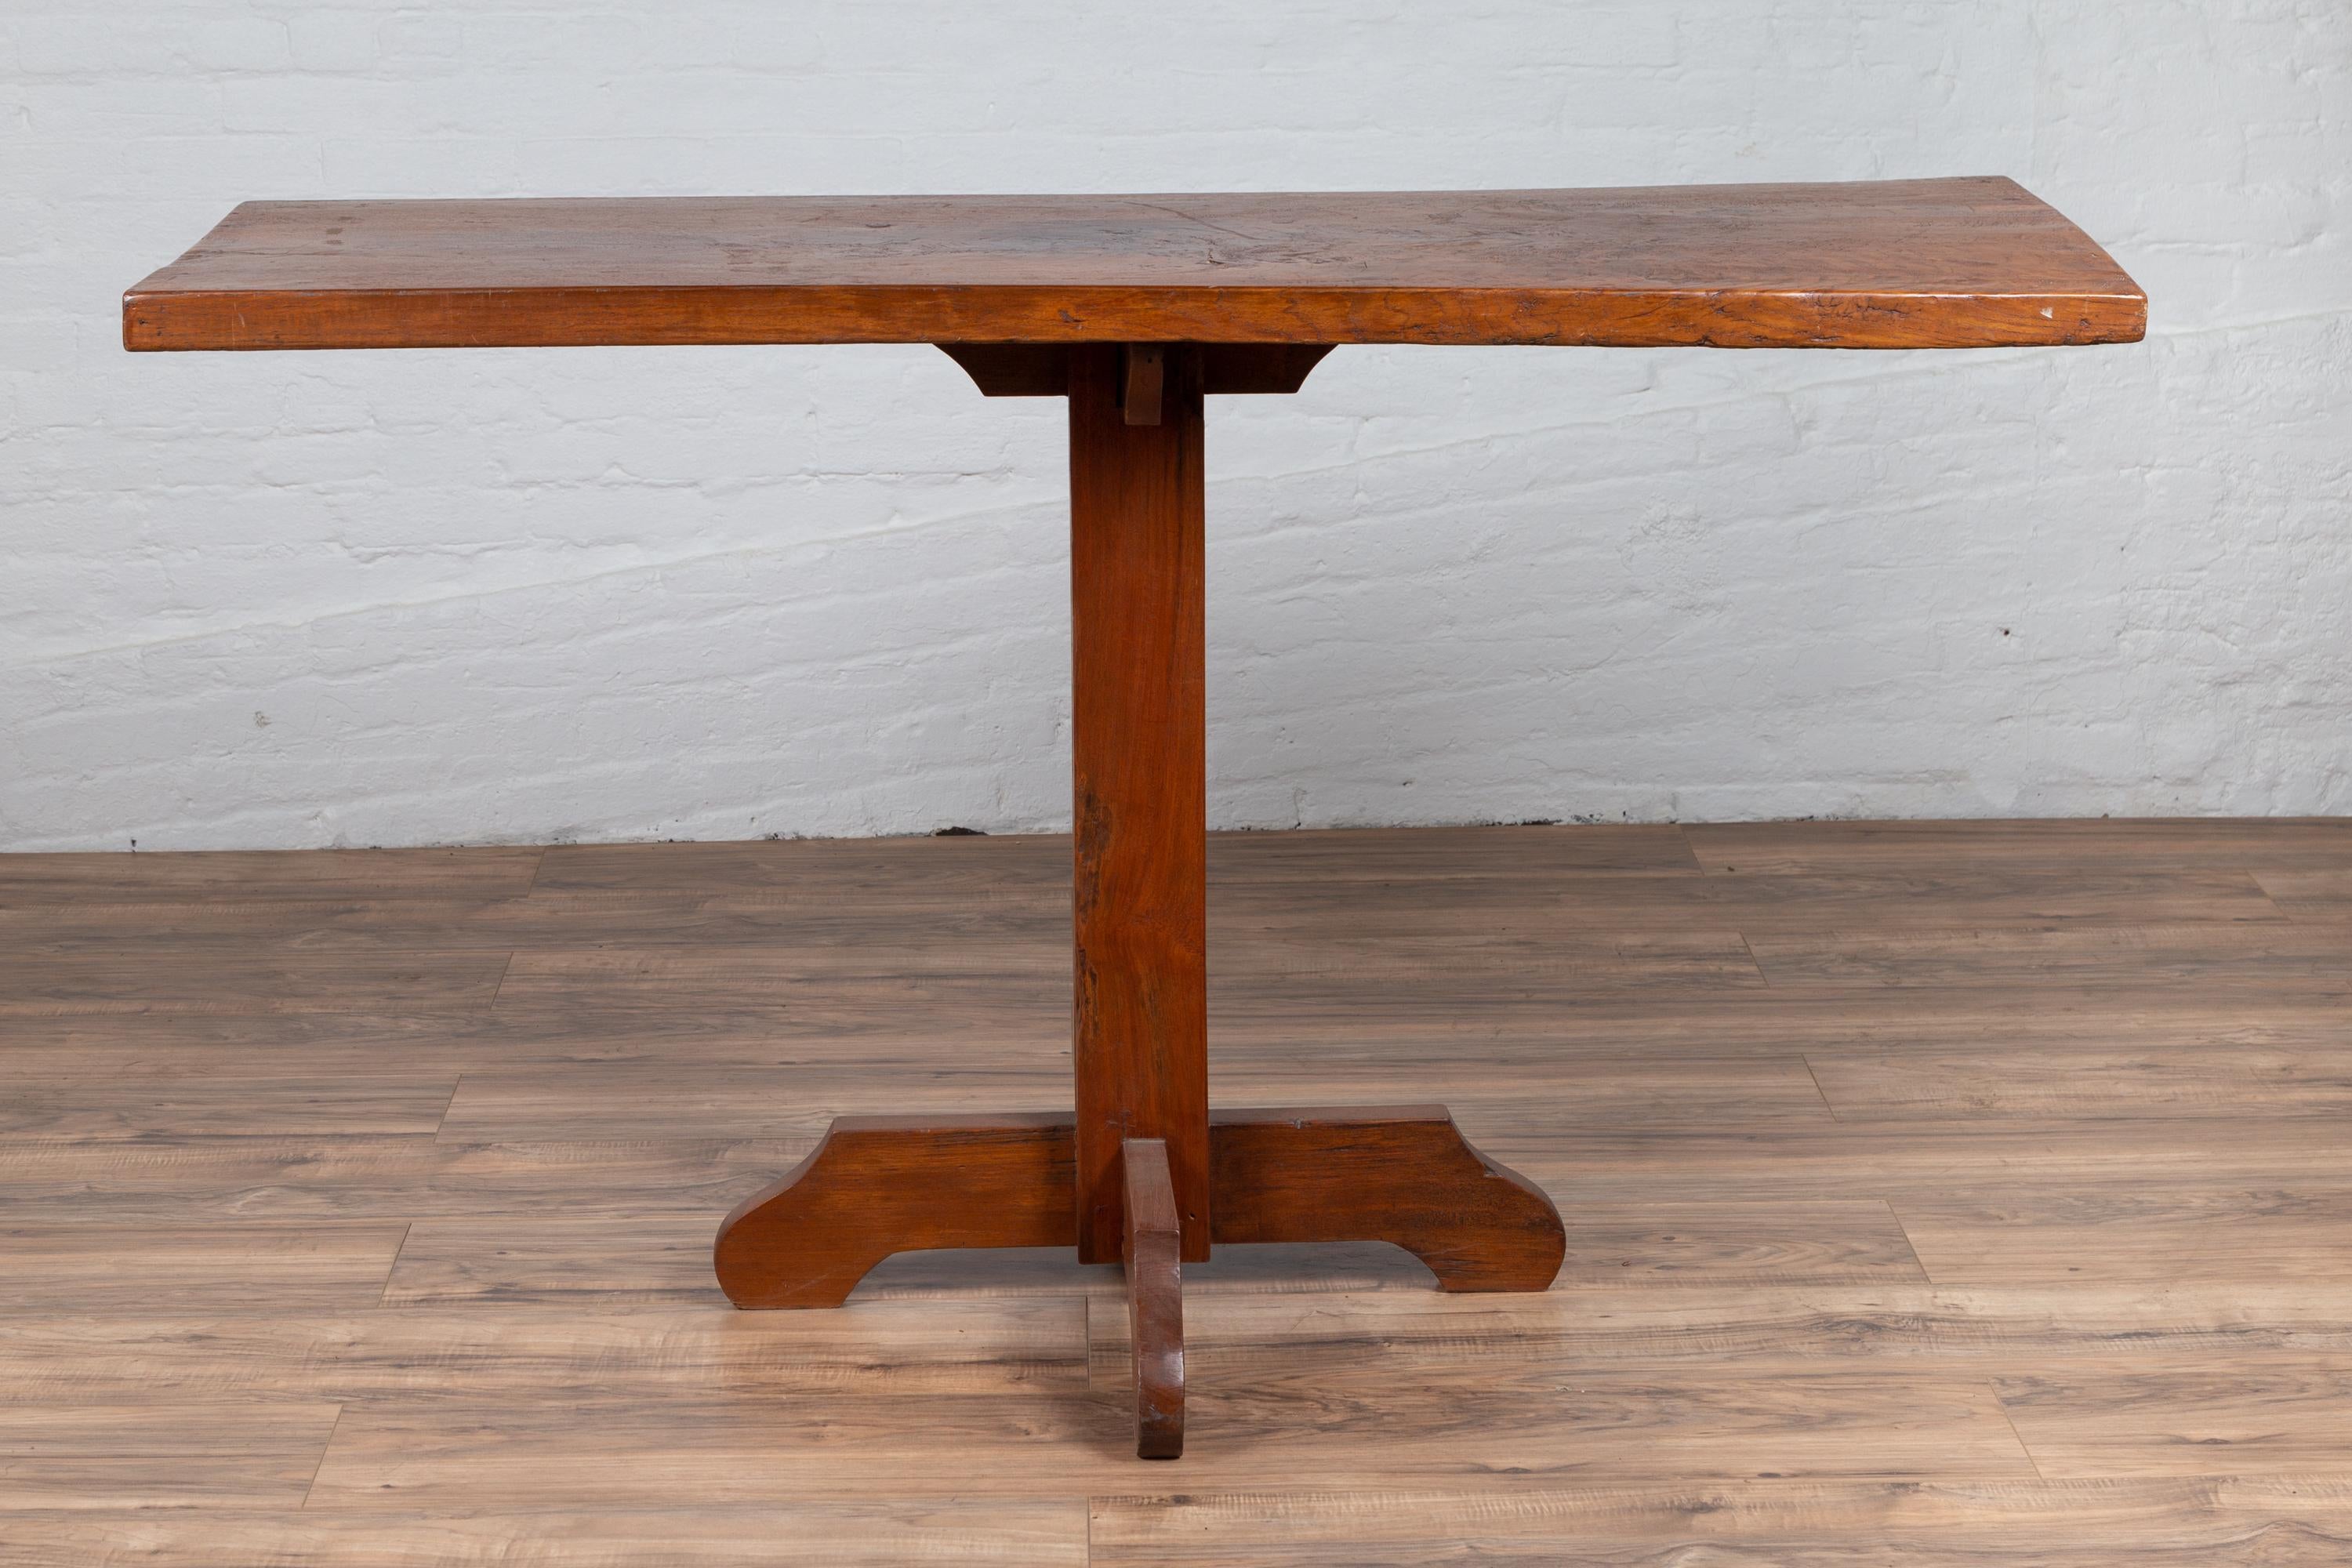 Rustic Indonesian Wooden Console Table with Single Plank Top and Pedestal Base In Good Condition For Sale In Yonkers, NY